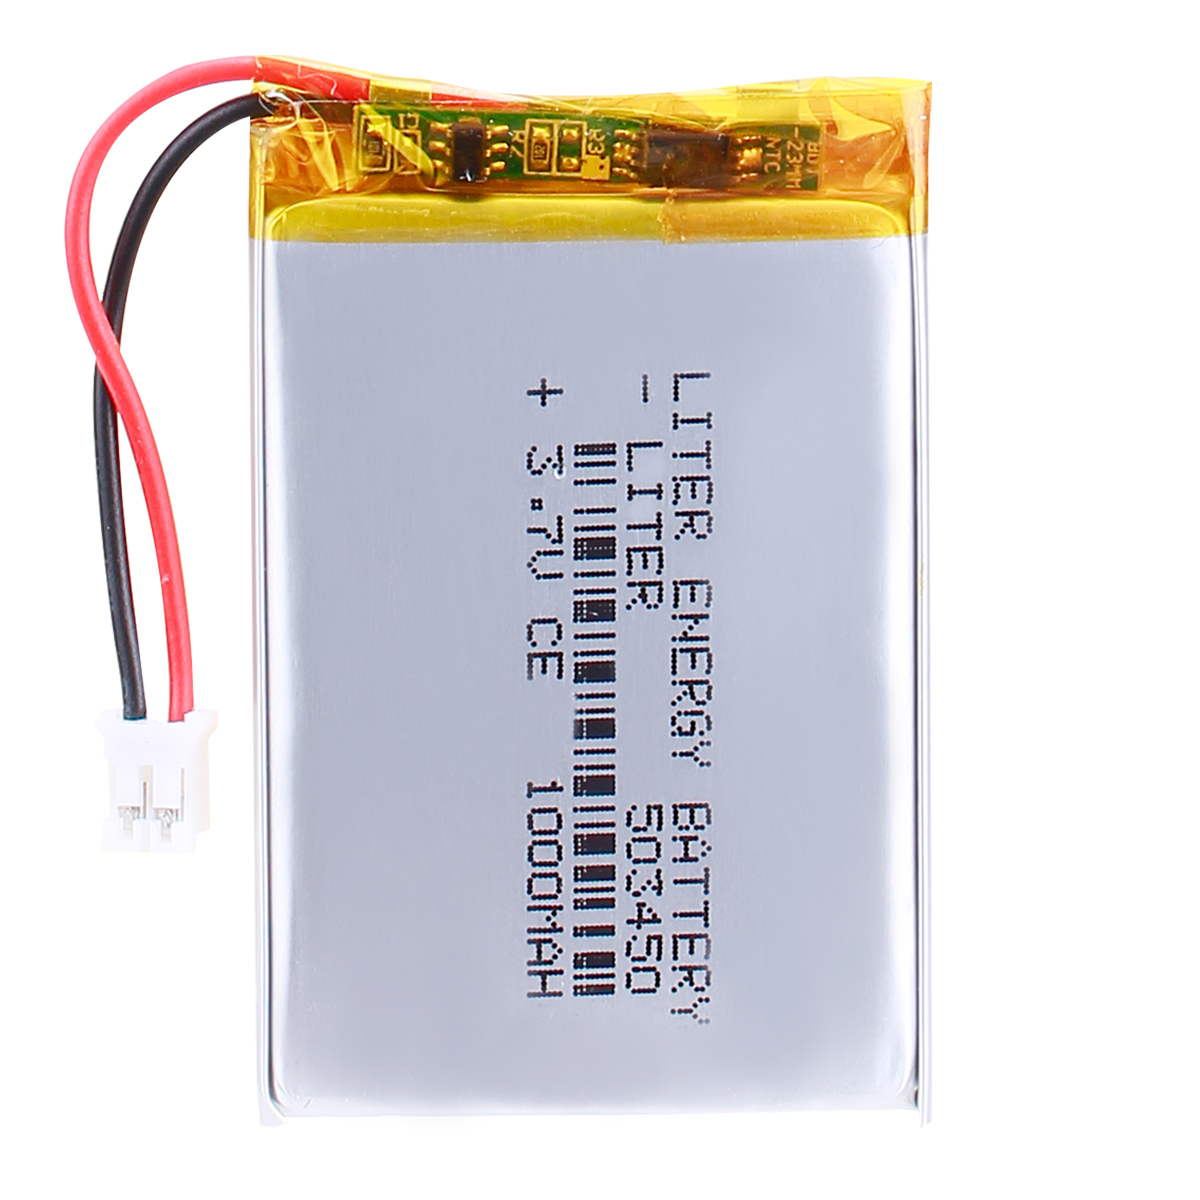 100pcs Lithium Polymer Battery liter 503450 3.7V 1000mAh With PCM & Wires